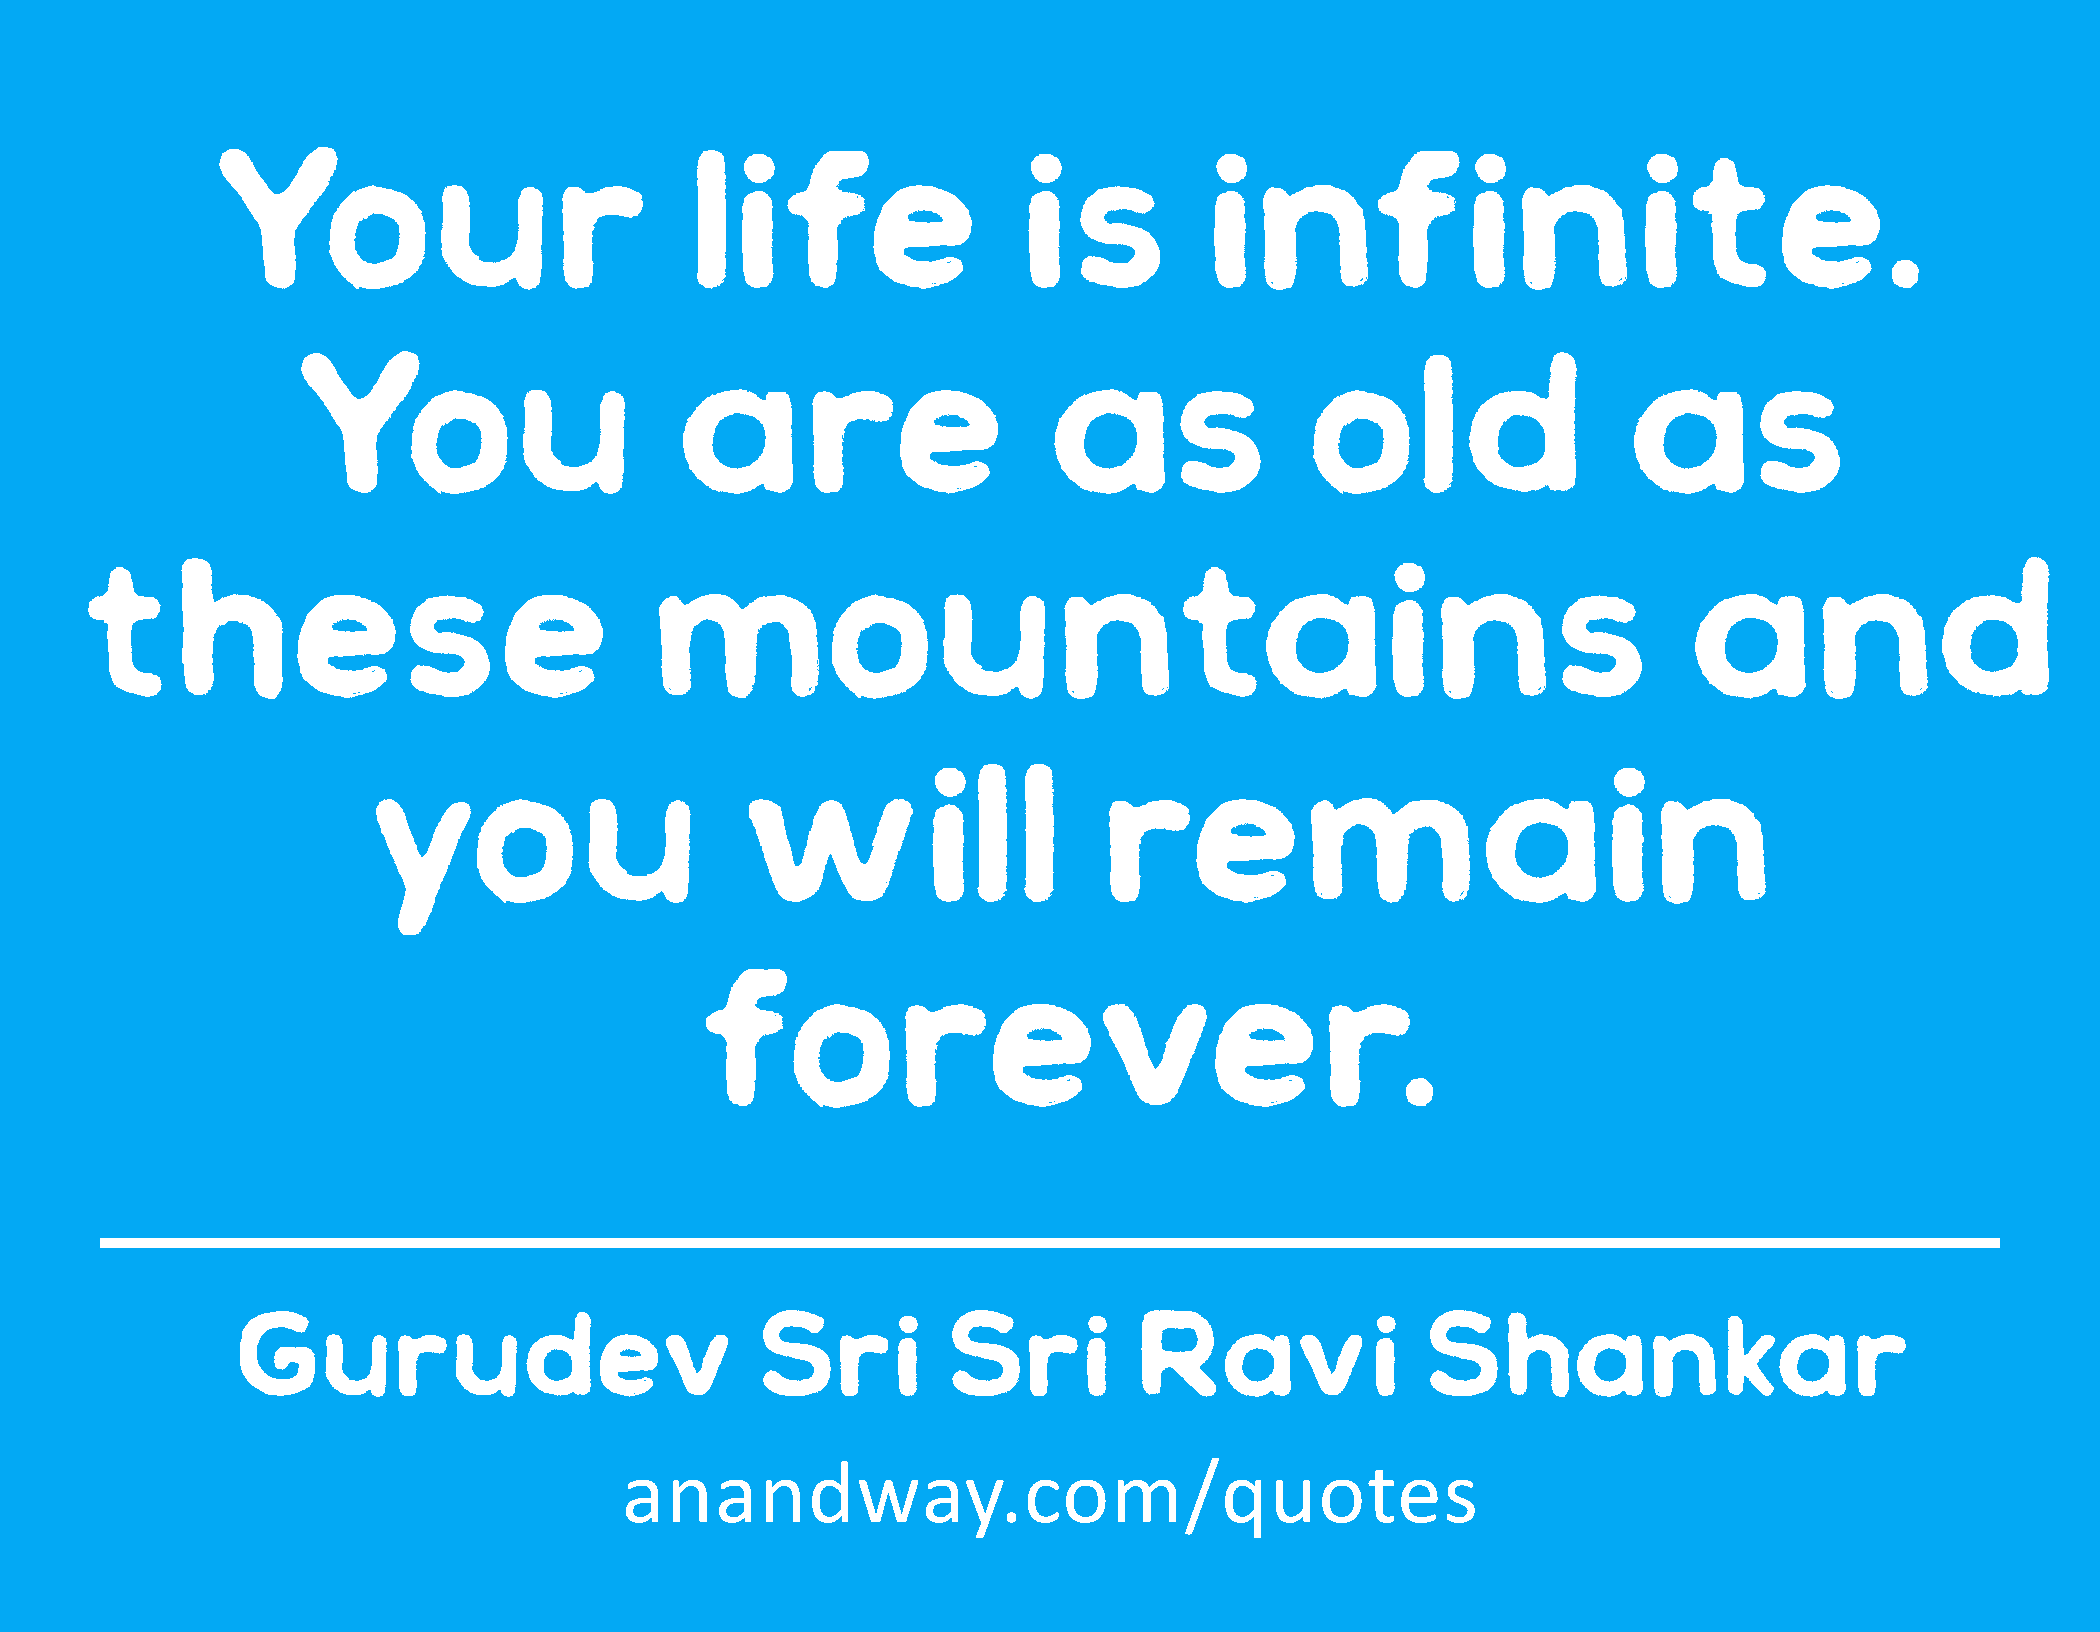 Your life is infinite. You are as old as these mountains and you will remain forever. 
 -Gurudev Sri Sri Ravi Shankar